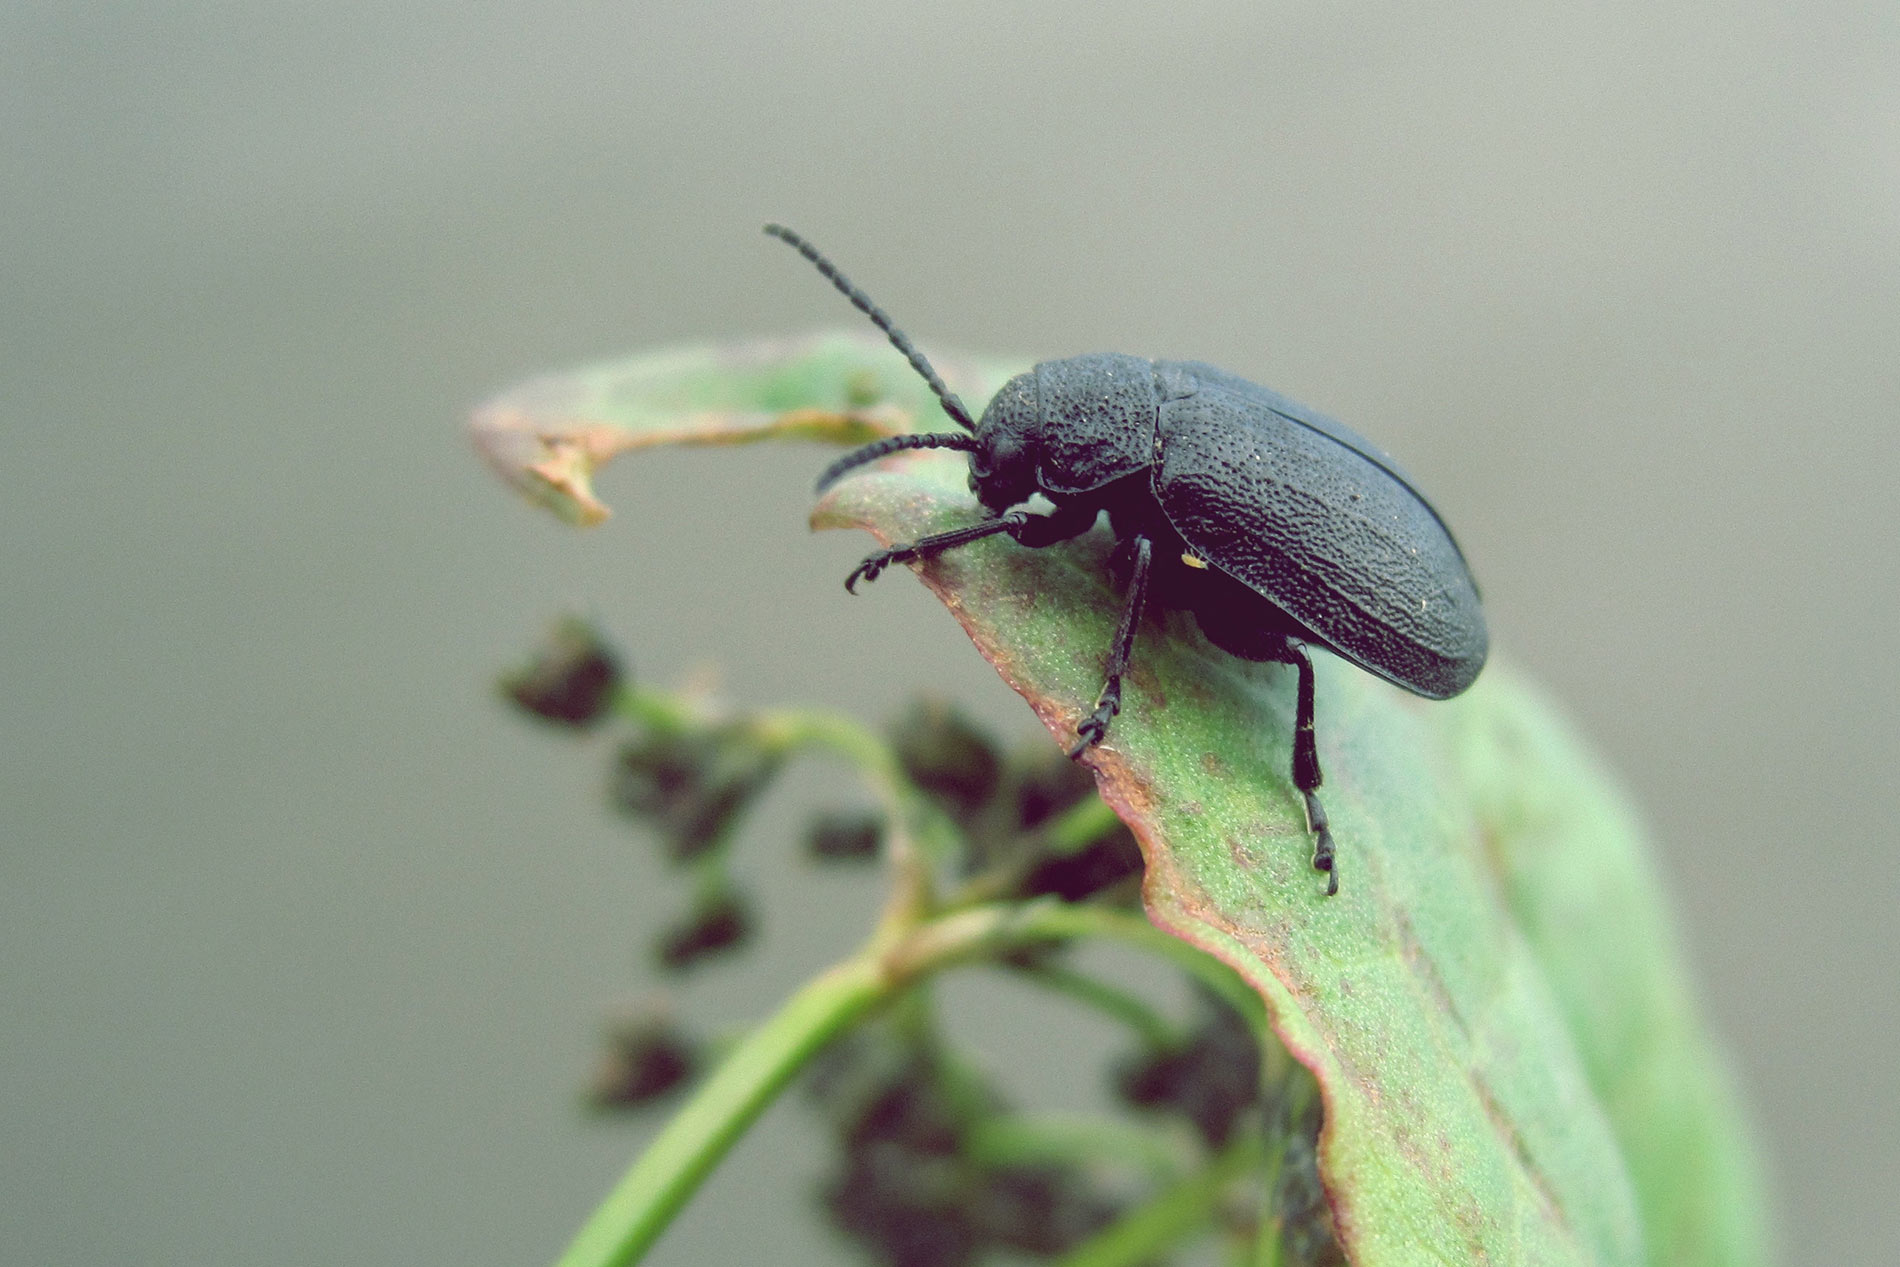 Beetle on leaf, Tacoma-based and family-owned pest control and inspection company